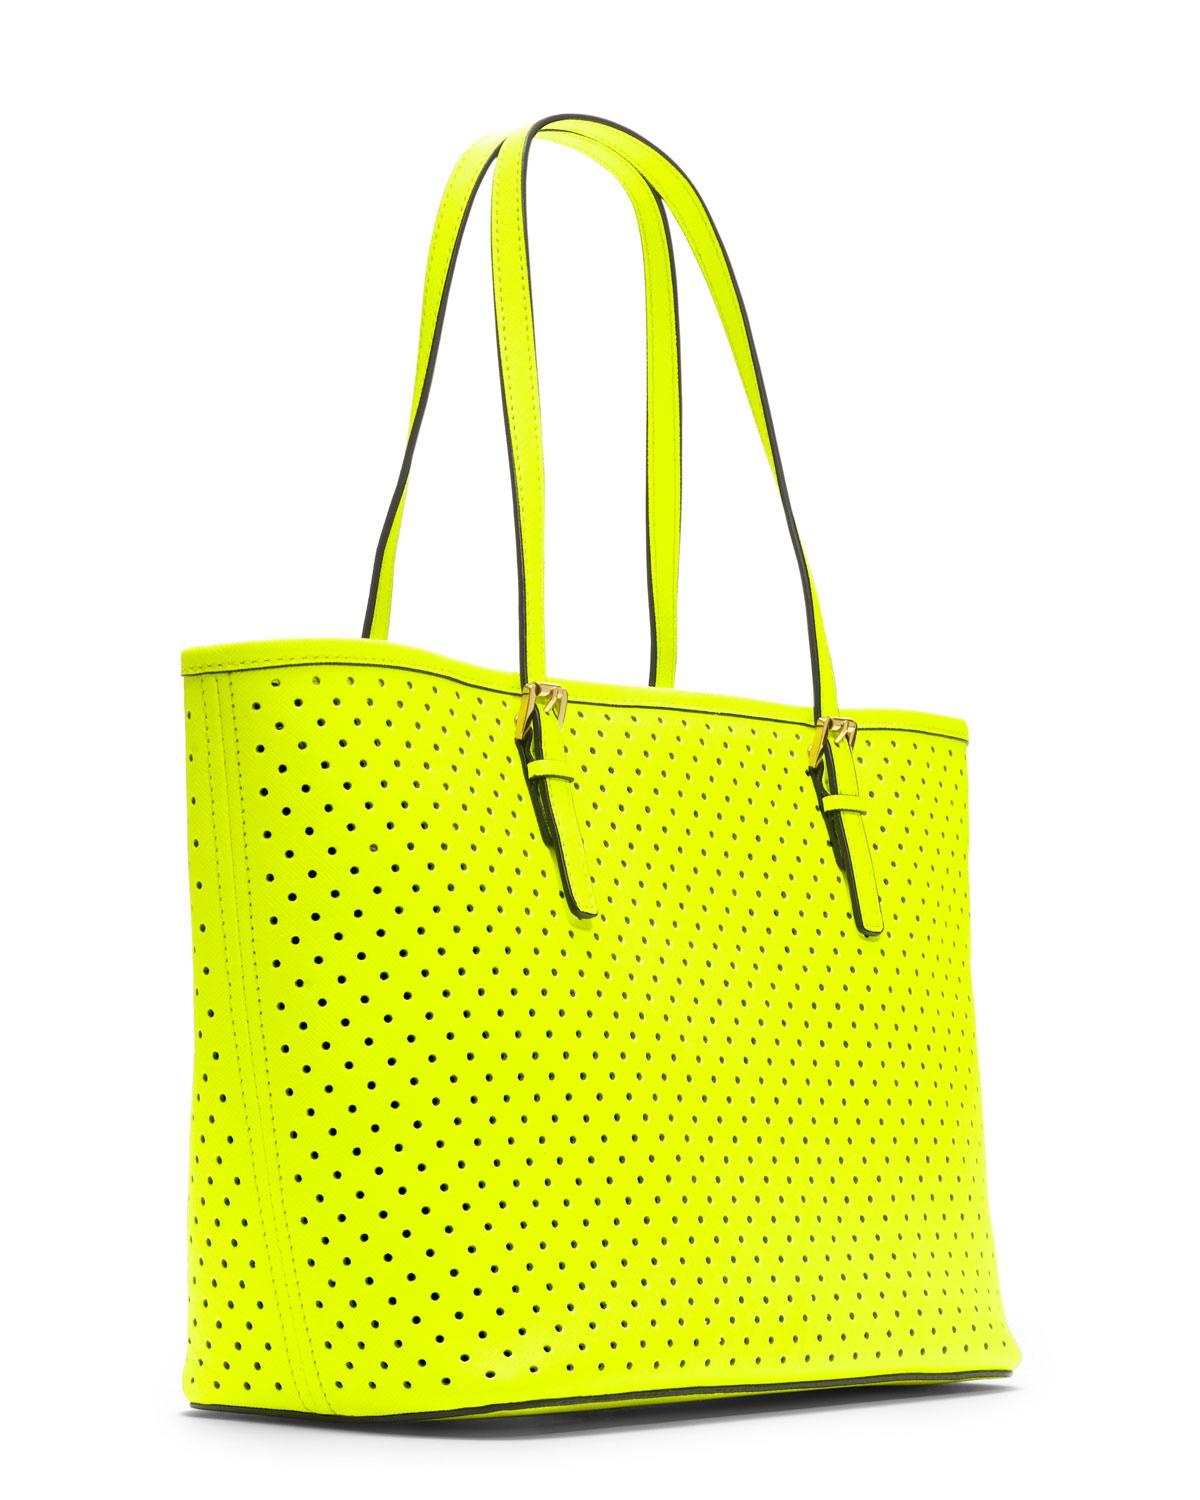 Michael Kors Small Jet Set Perforated Travel Tote in Yellow - Lyst